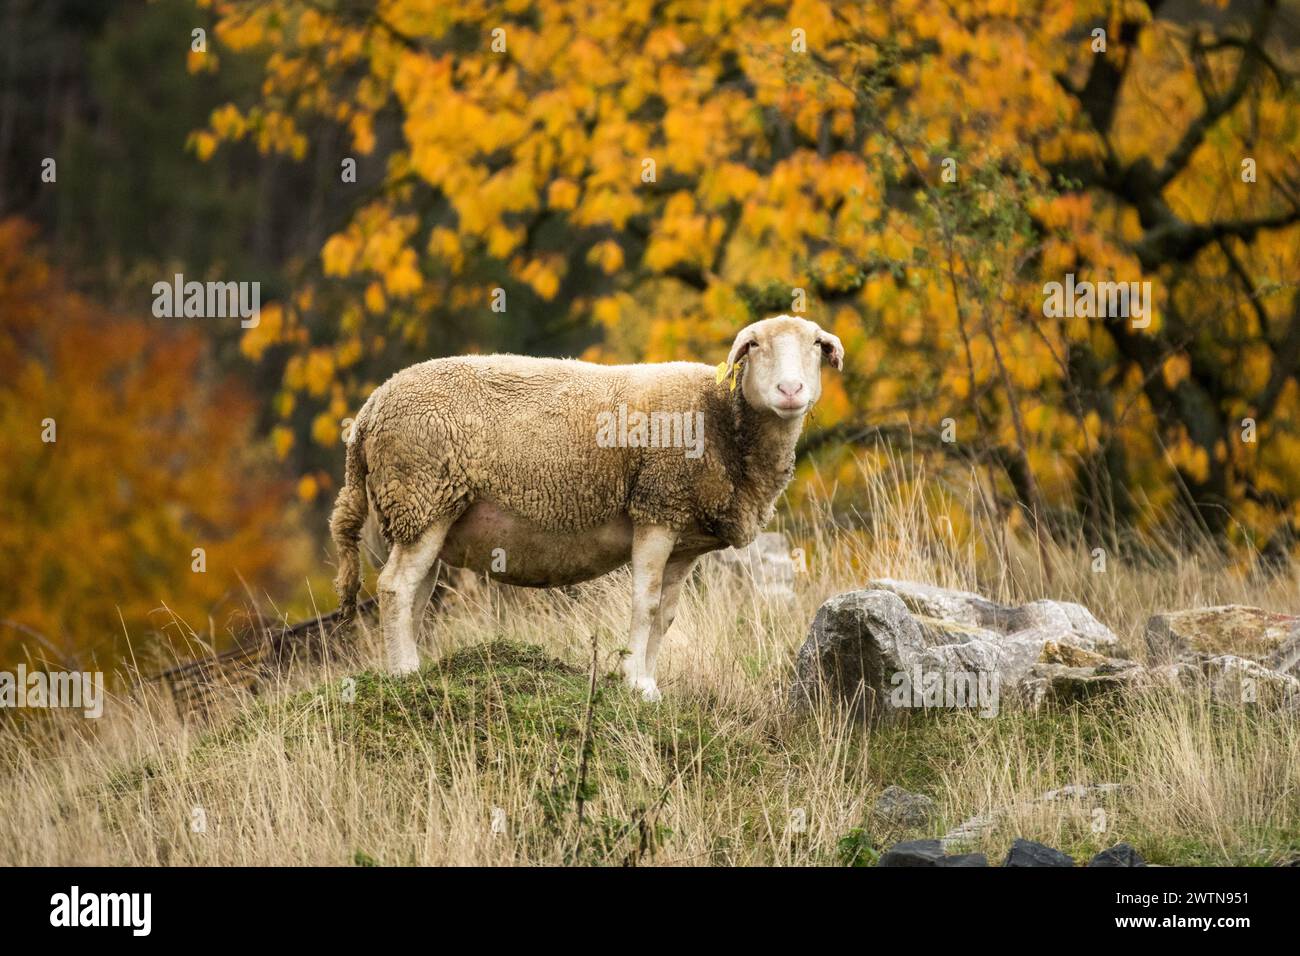 One Sheep Autumn Pasture Side View Sheep Grassland Countryside Sheep look at Camera Domesticated Animal on Grassy Farm Scenery Autumnal Coloring Tree Stock Photo